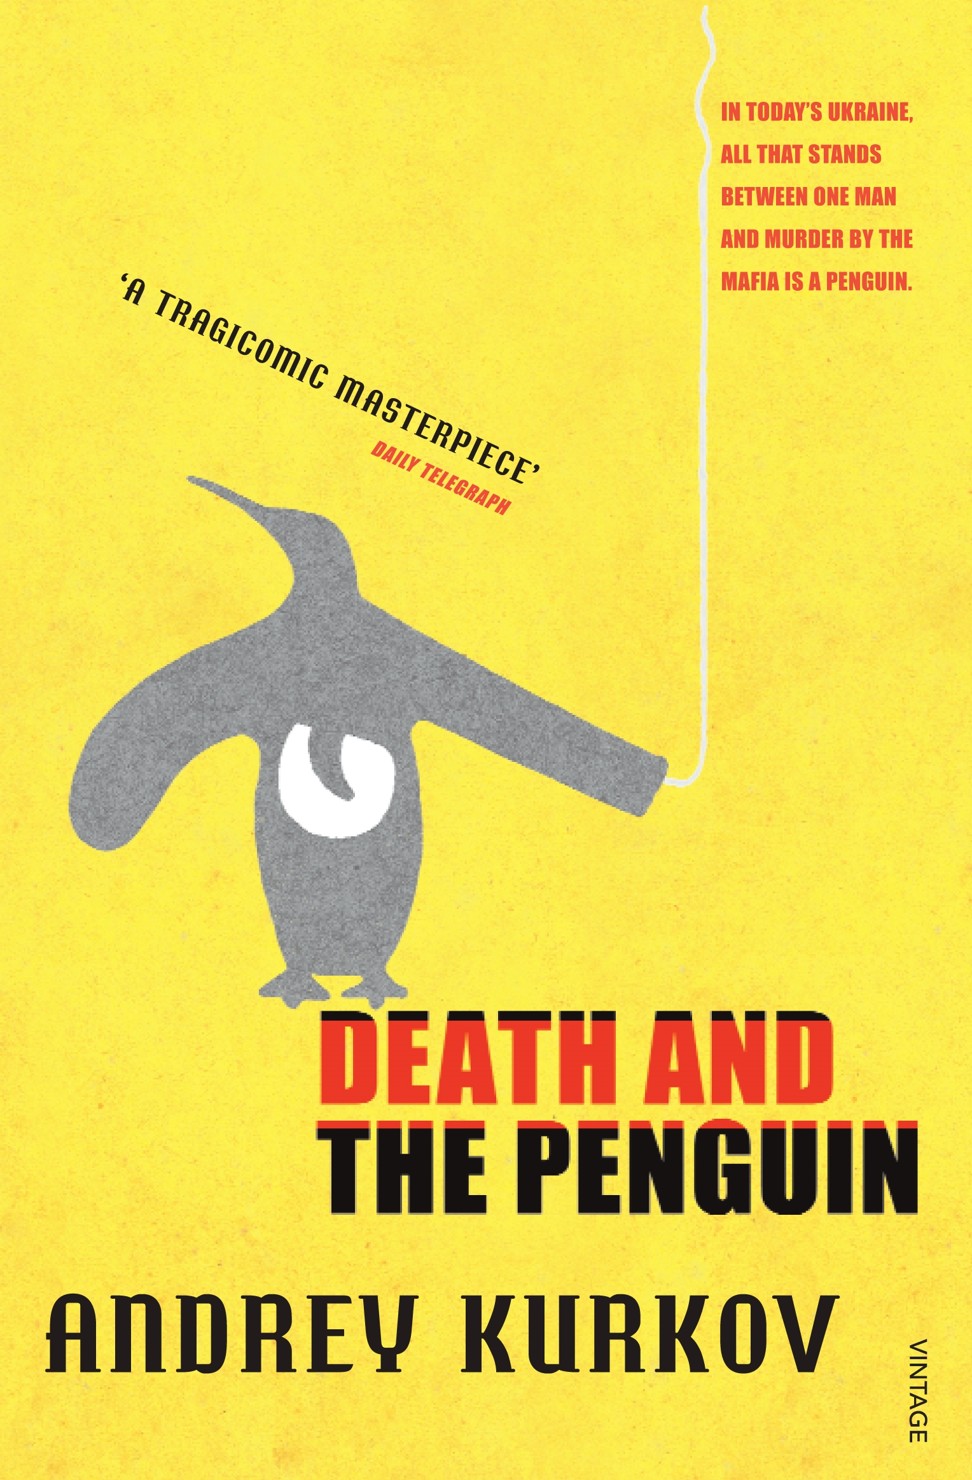 The cover of Death and the Penguin.